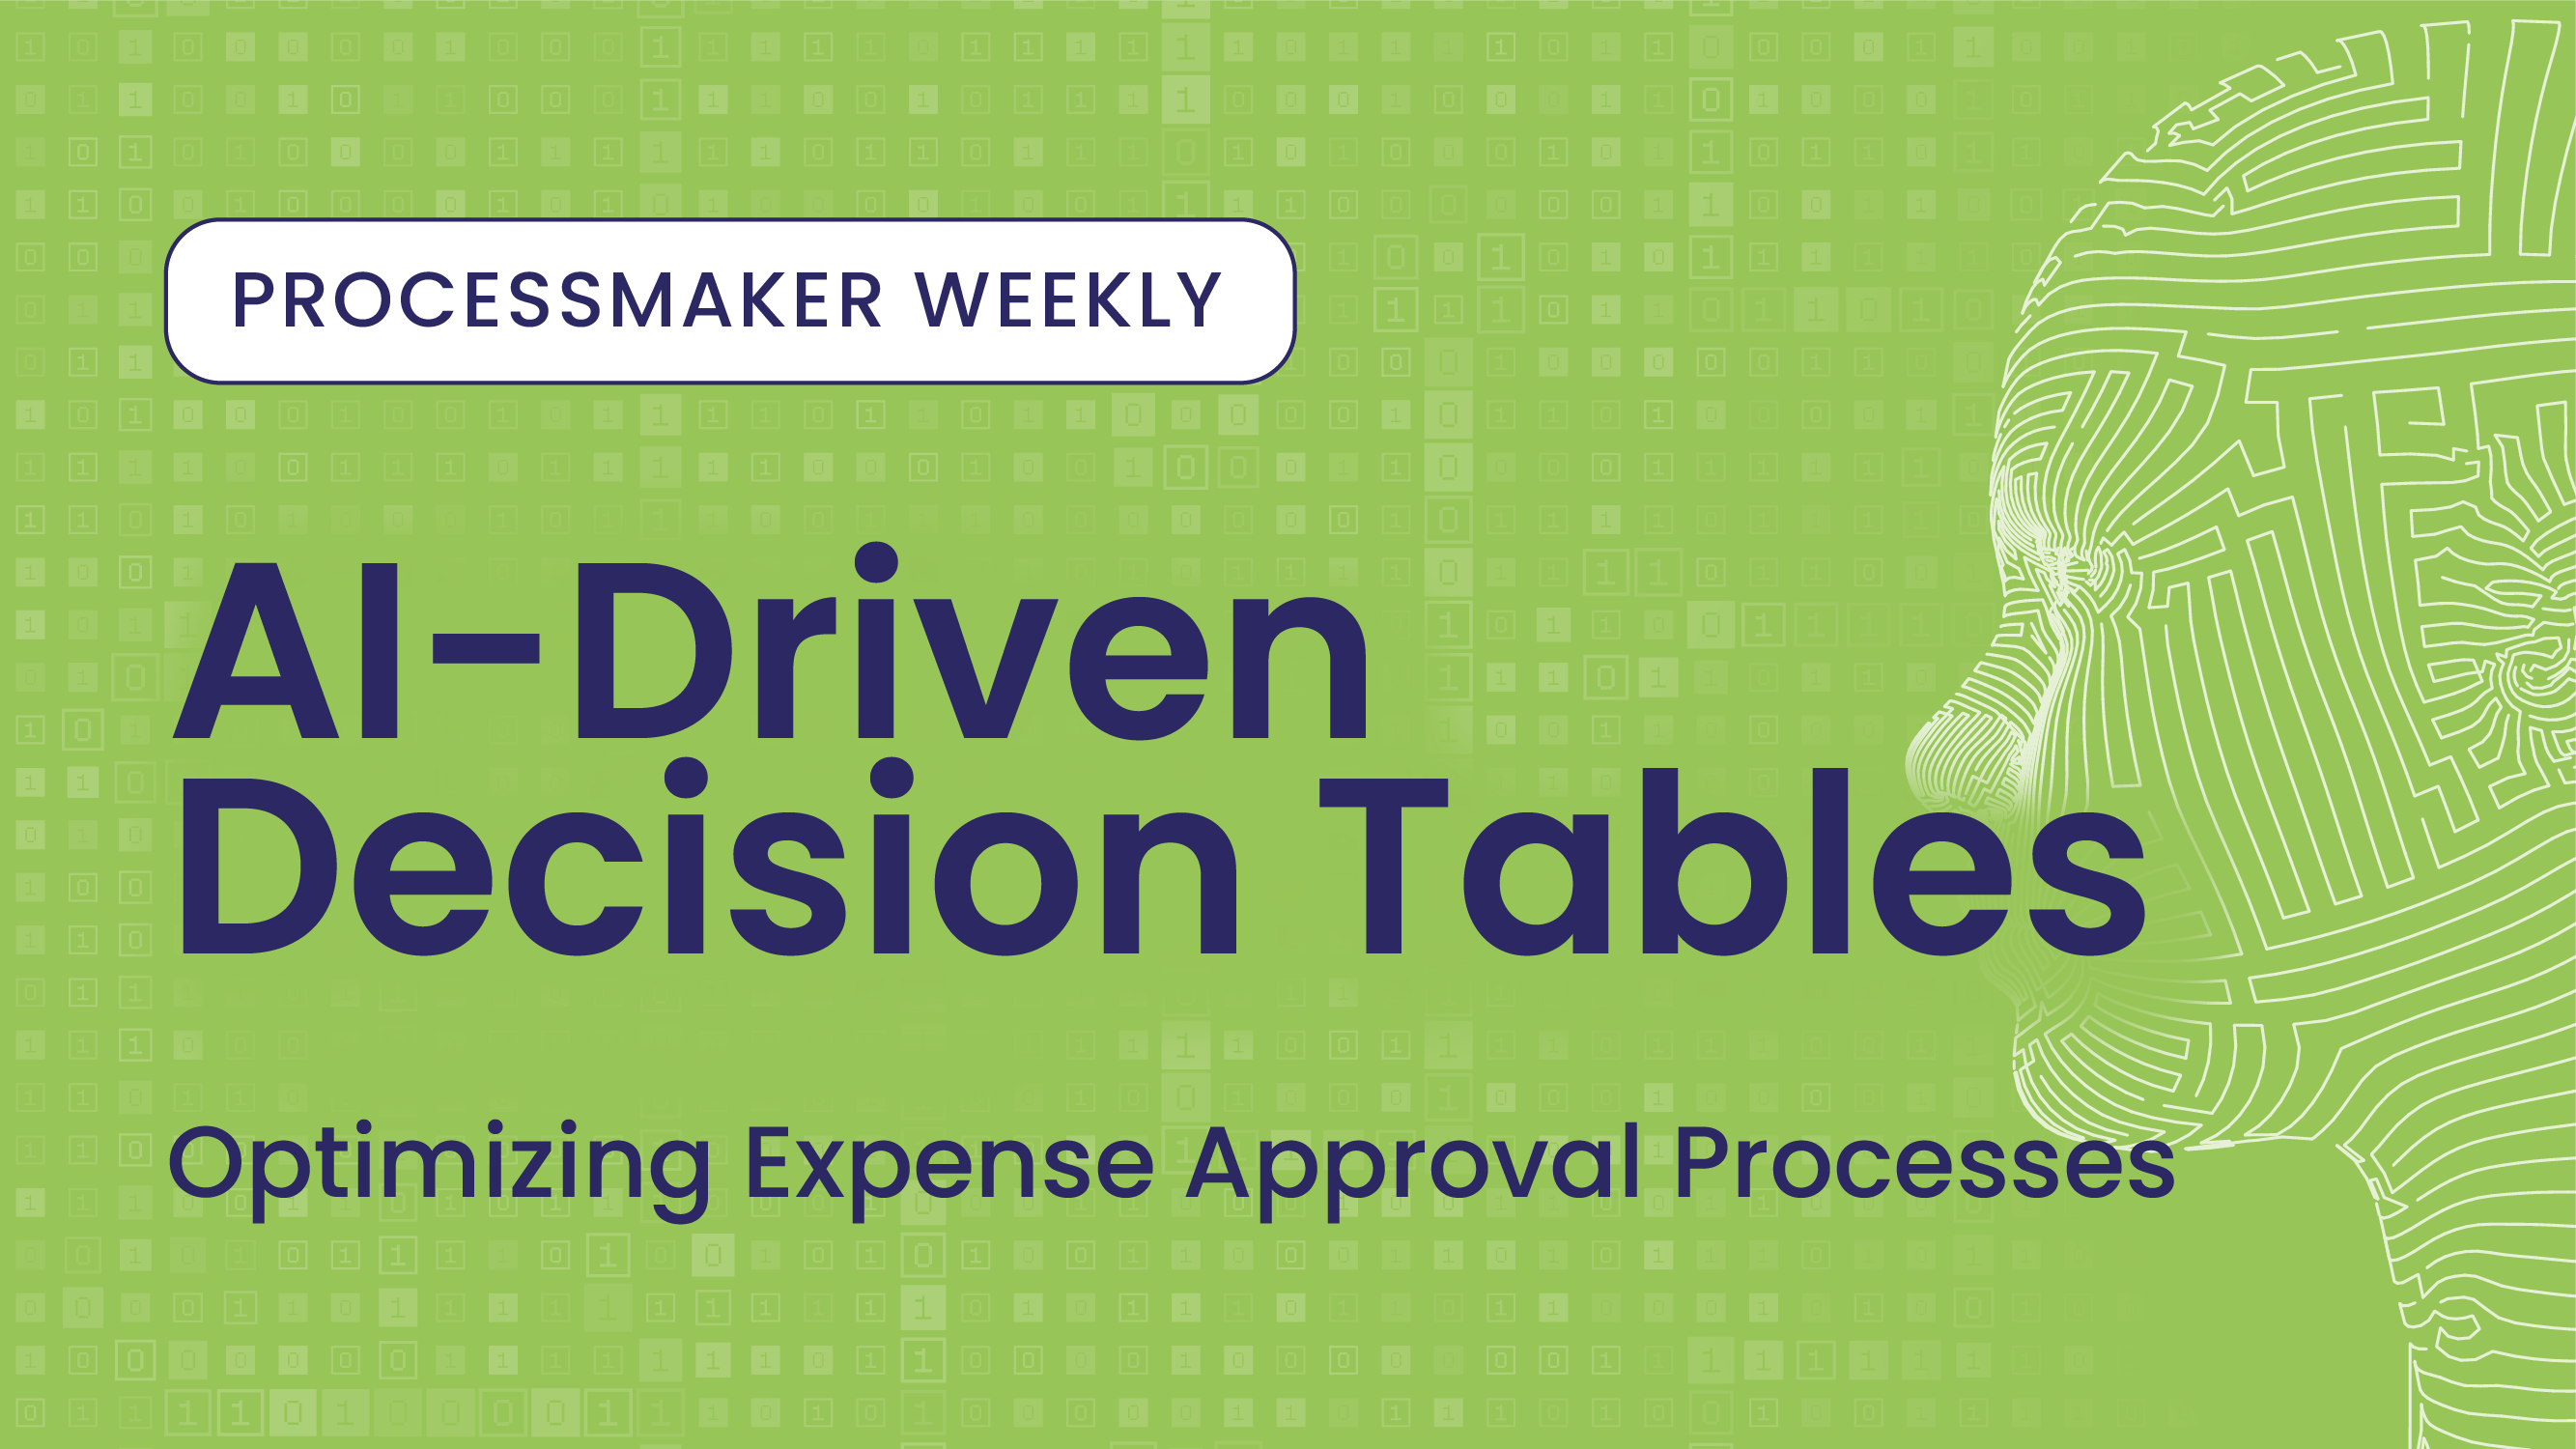 ProcessMaker Weekly: AI-Driven Decision Tables: Optimizing Expense Approval Processes